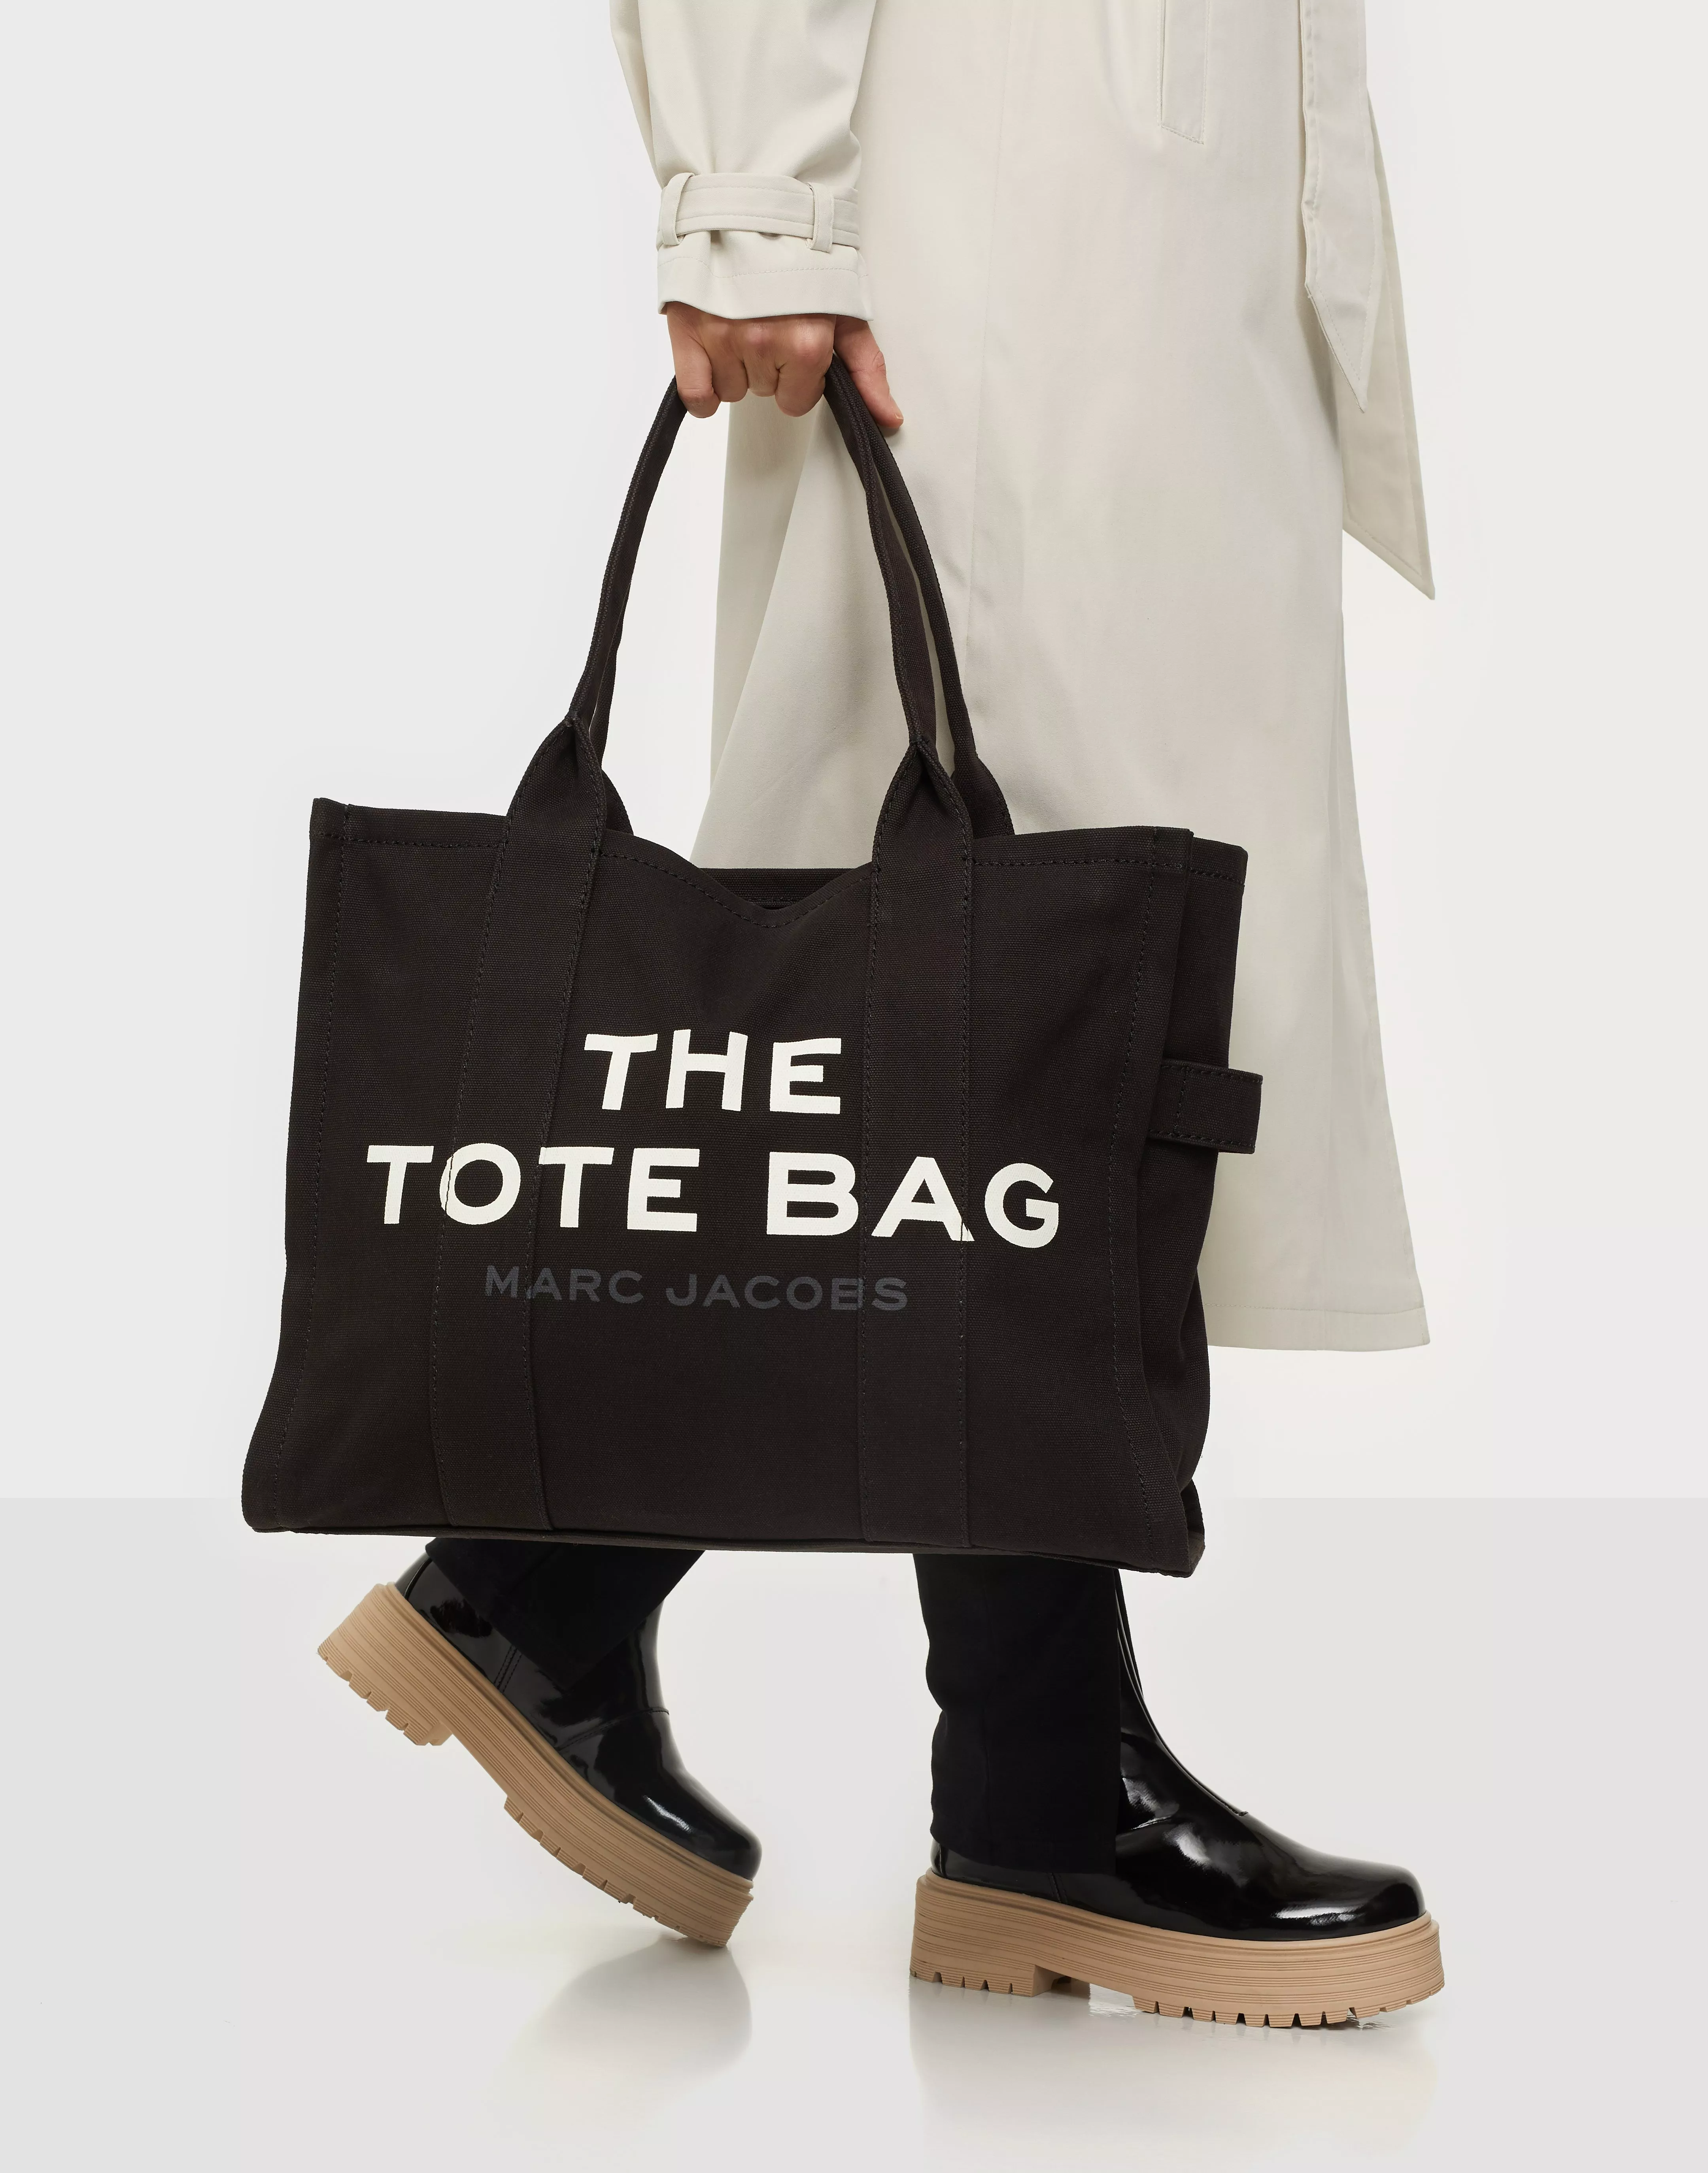 Marc Jacobs tote bags for Women